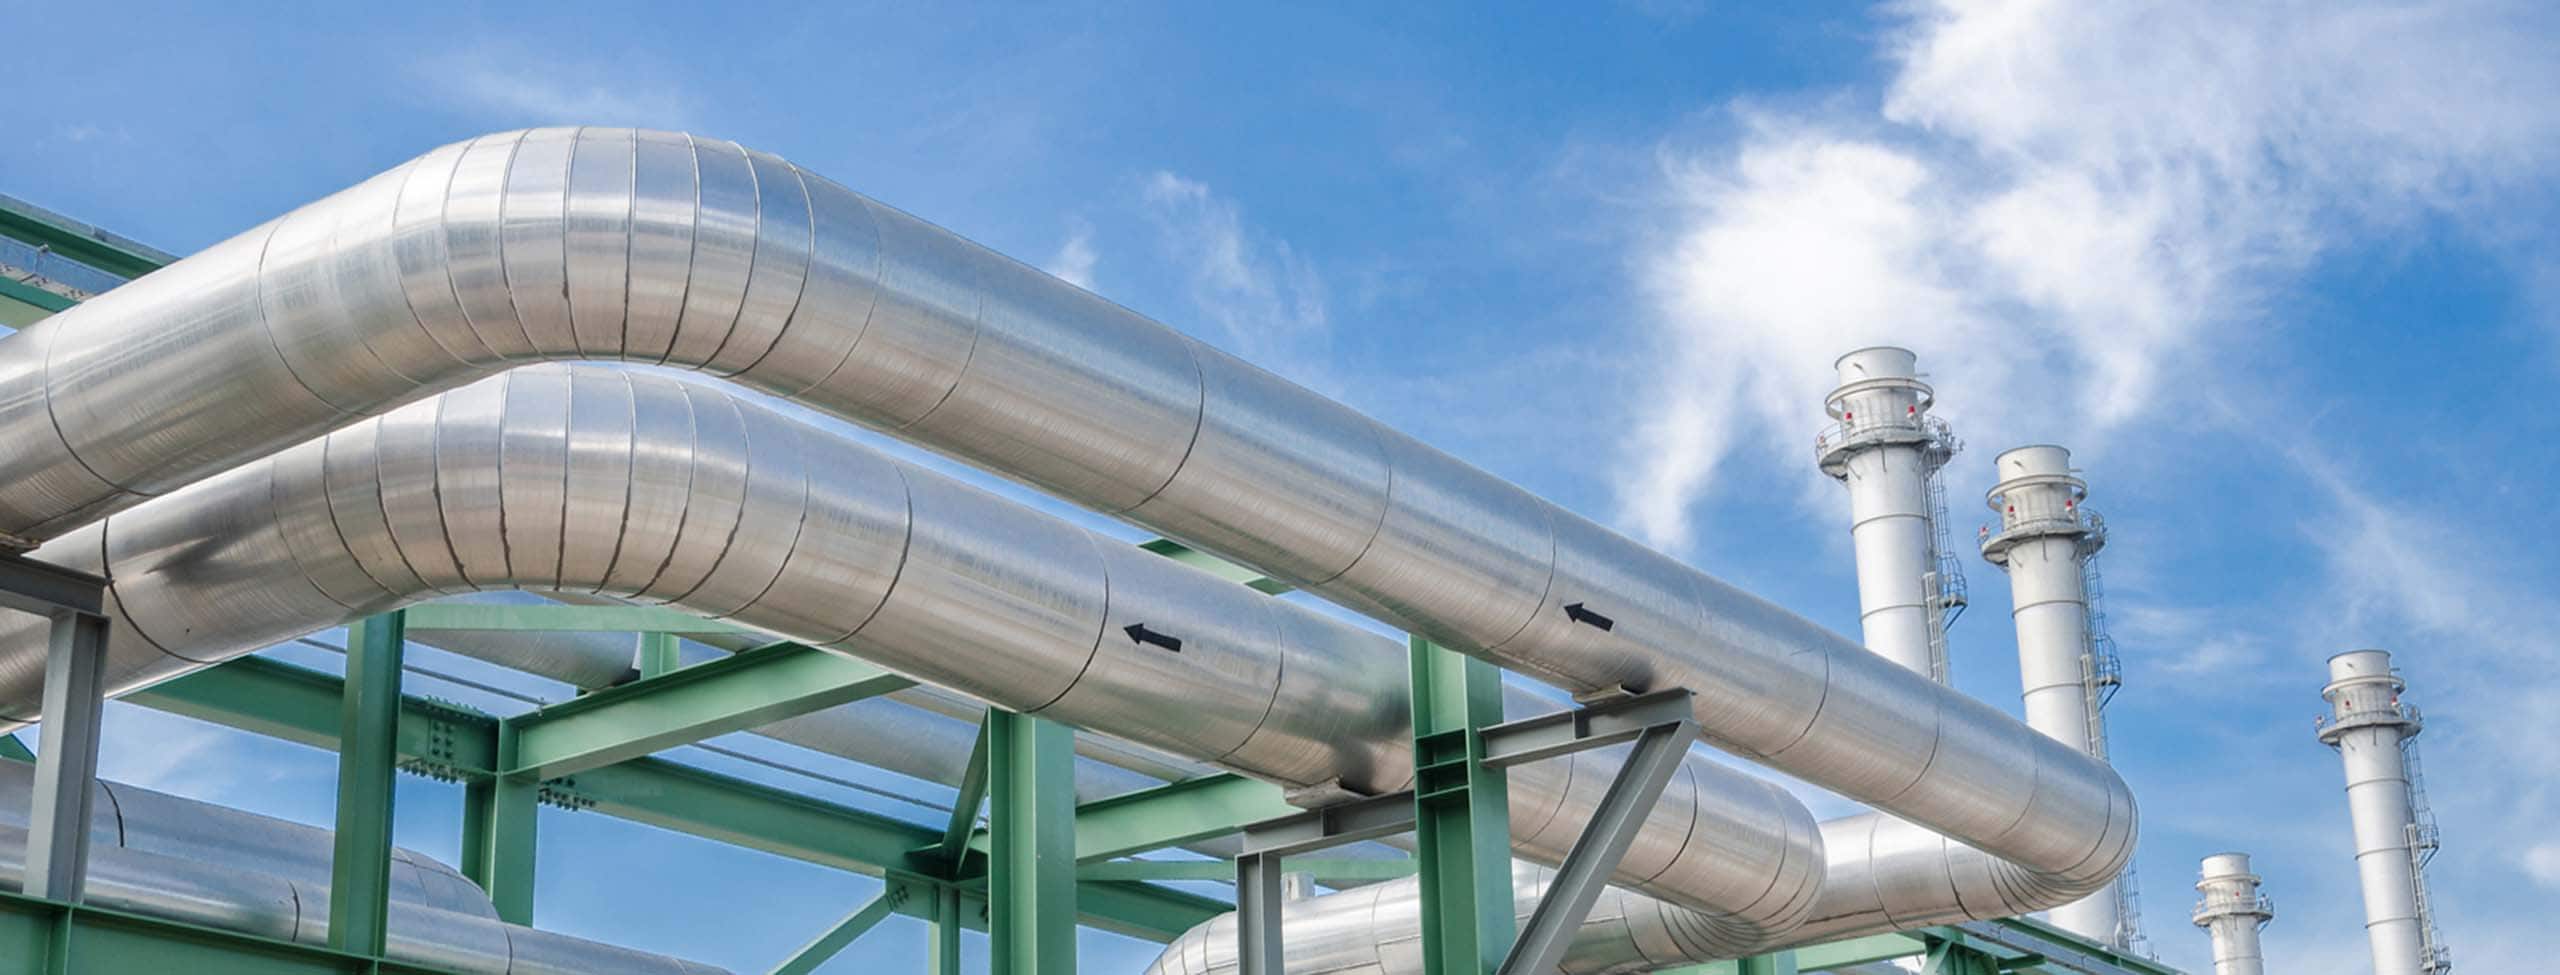 high pressure gas pipelines with the a blue sky in the background